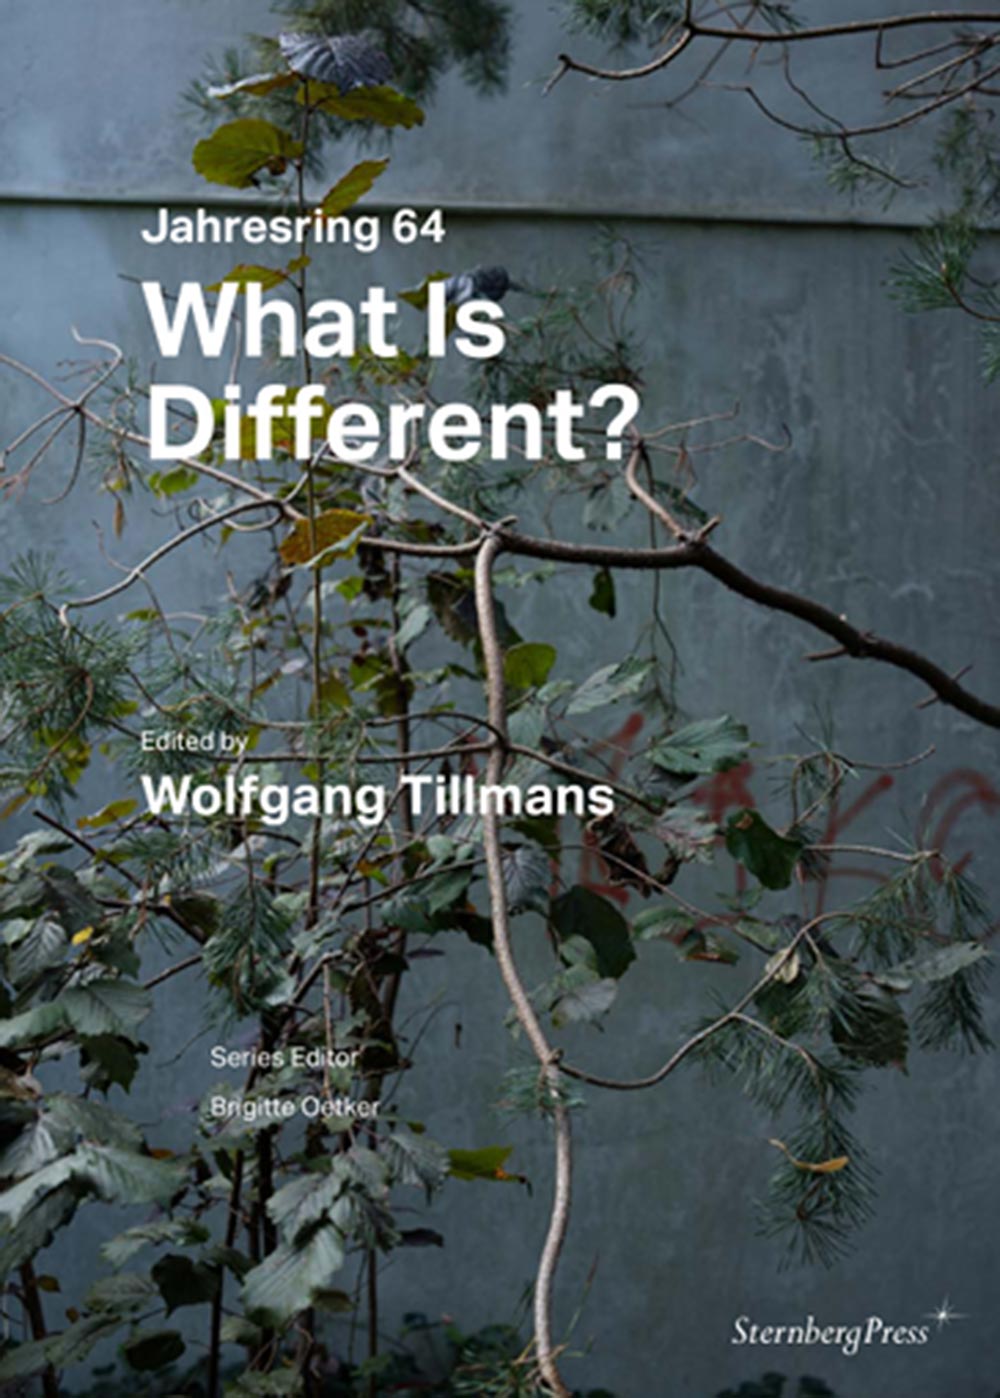 Wolfgang Tillmans: What Is Different?